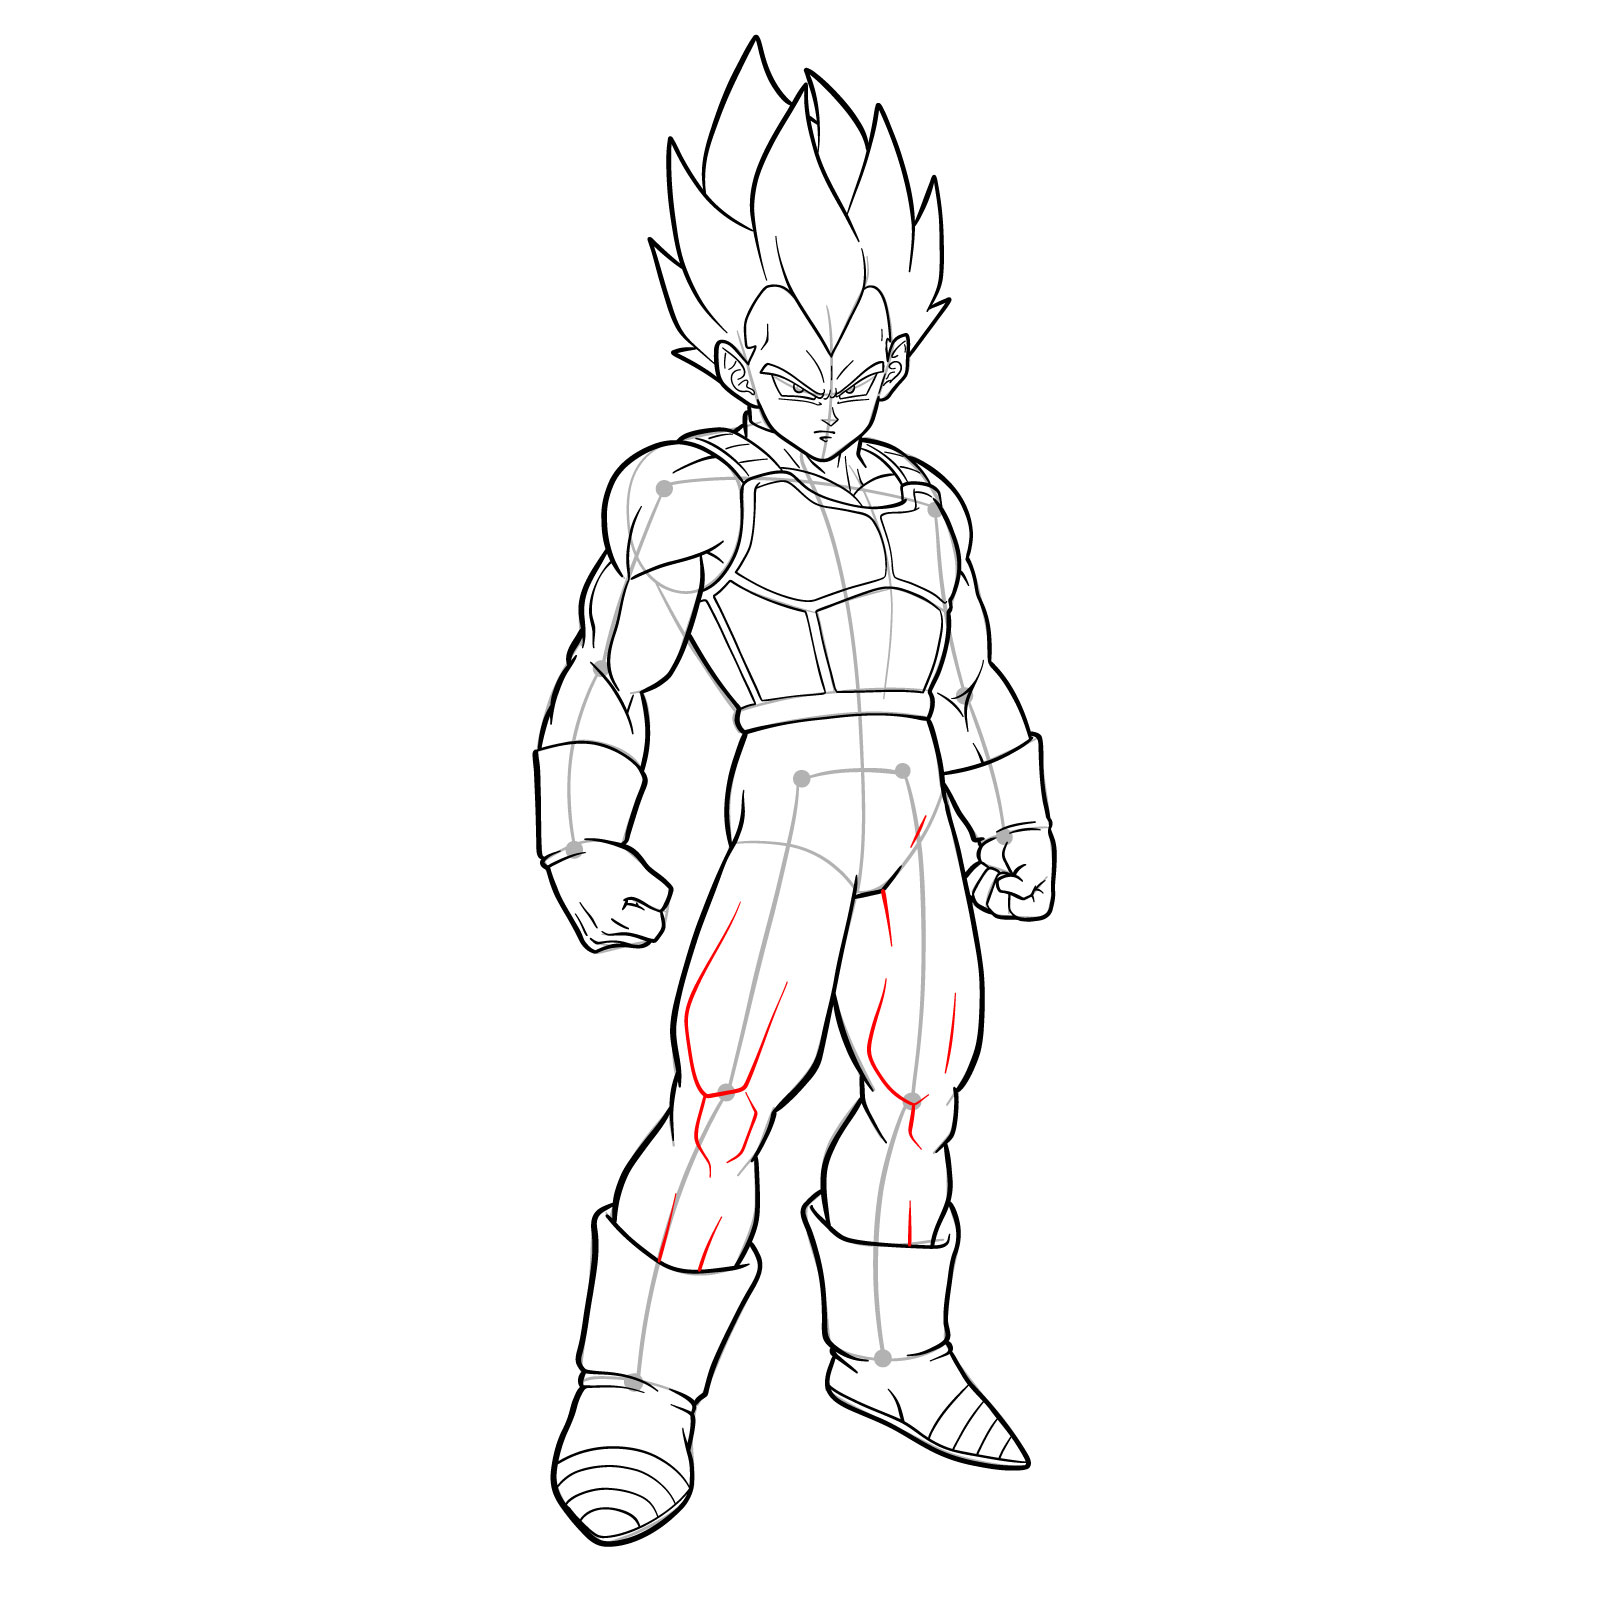 How to draw Vegeta in SSGSS - step 41